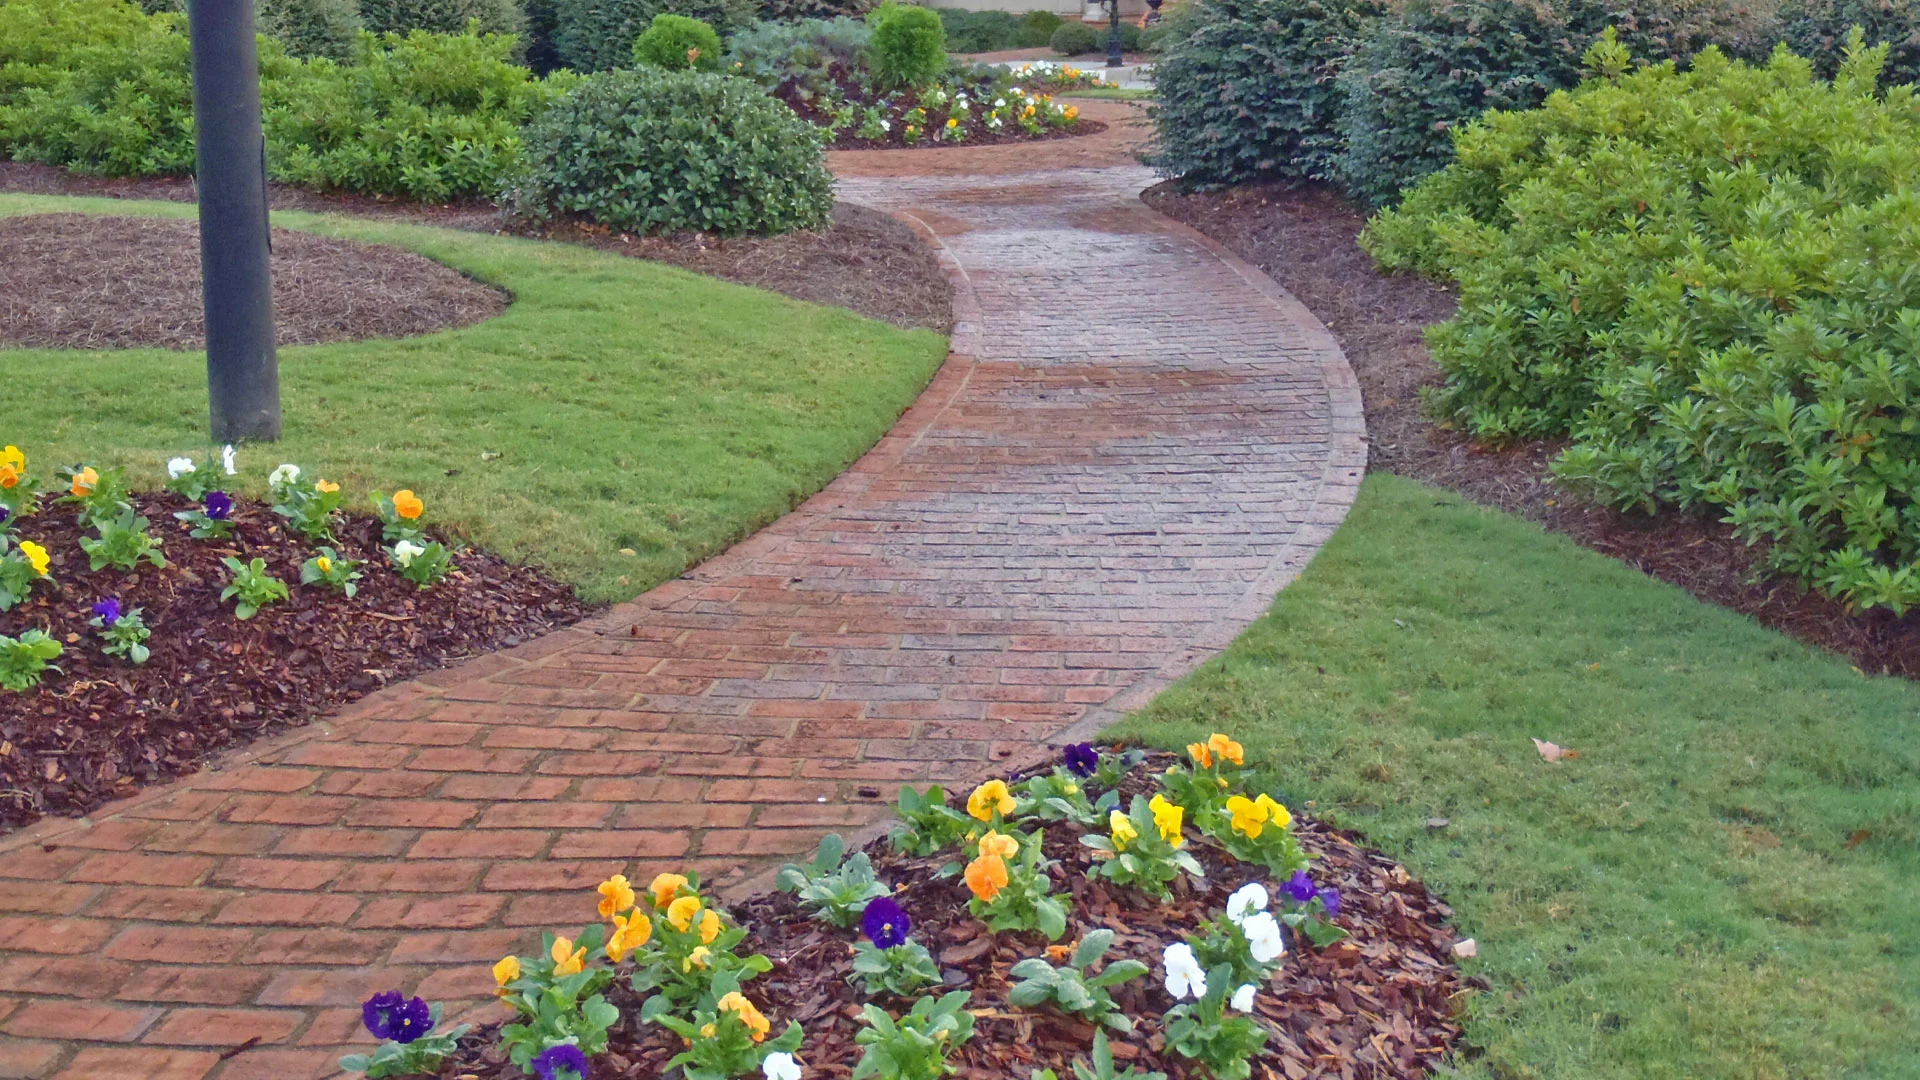 Landscaping with annuals and a paver walkway installation.